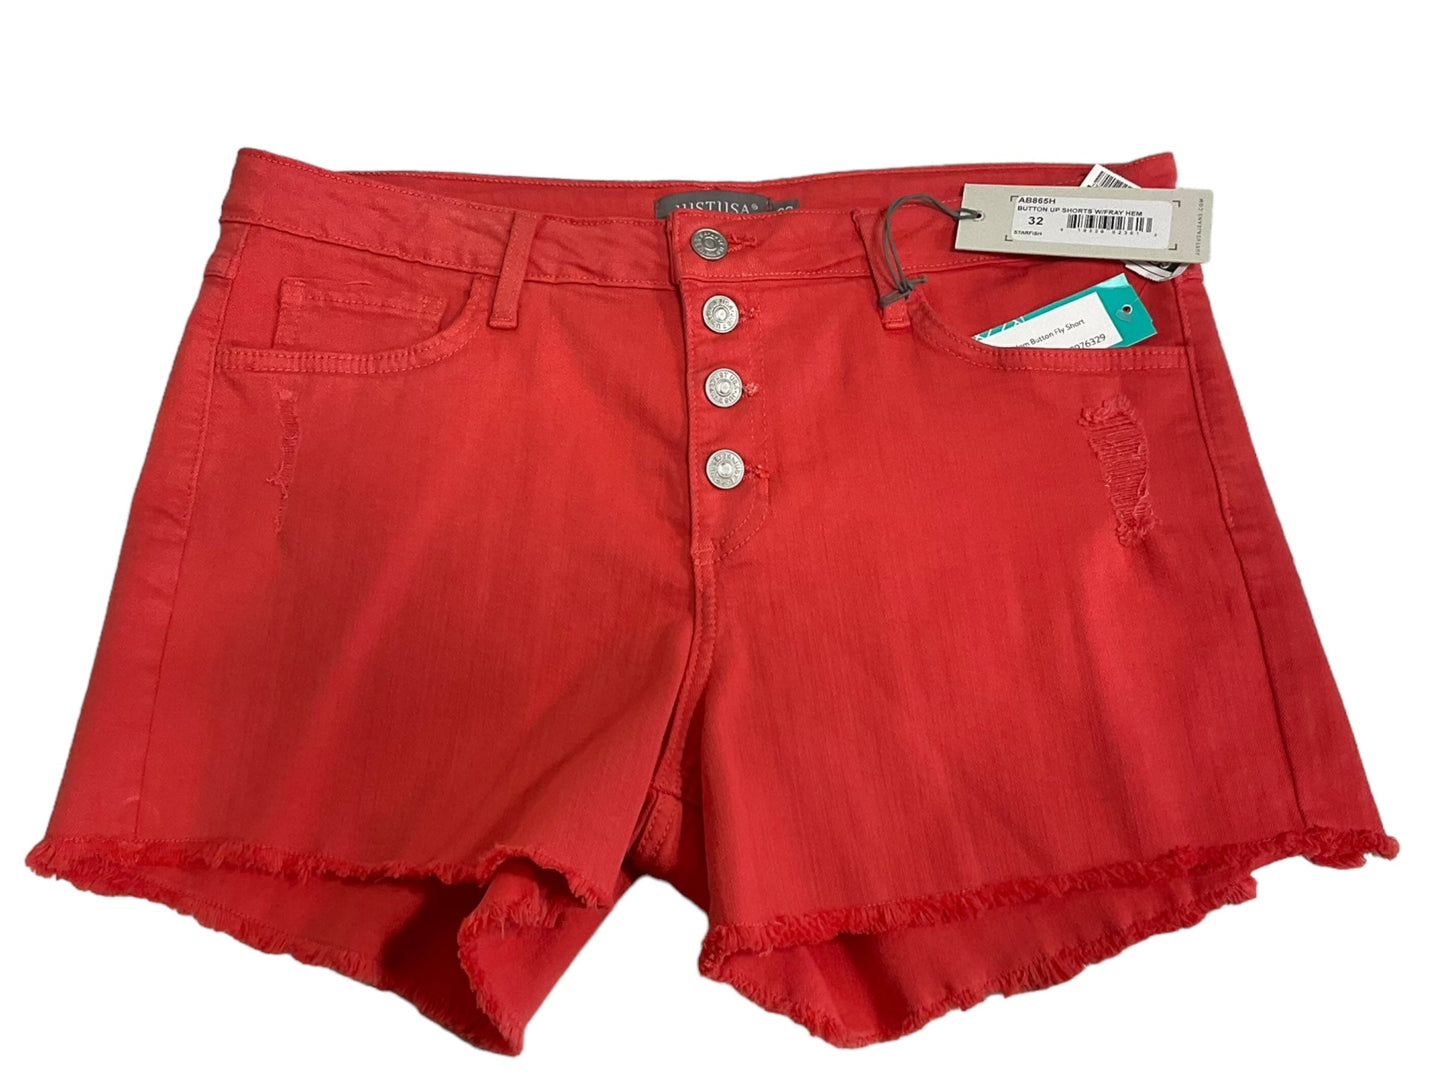 Coral Shorts Clothes Mentor, Size 14